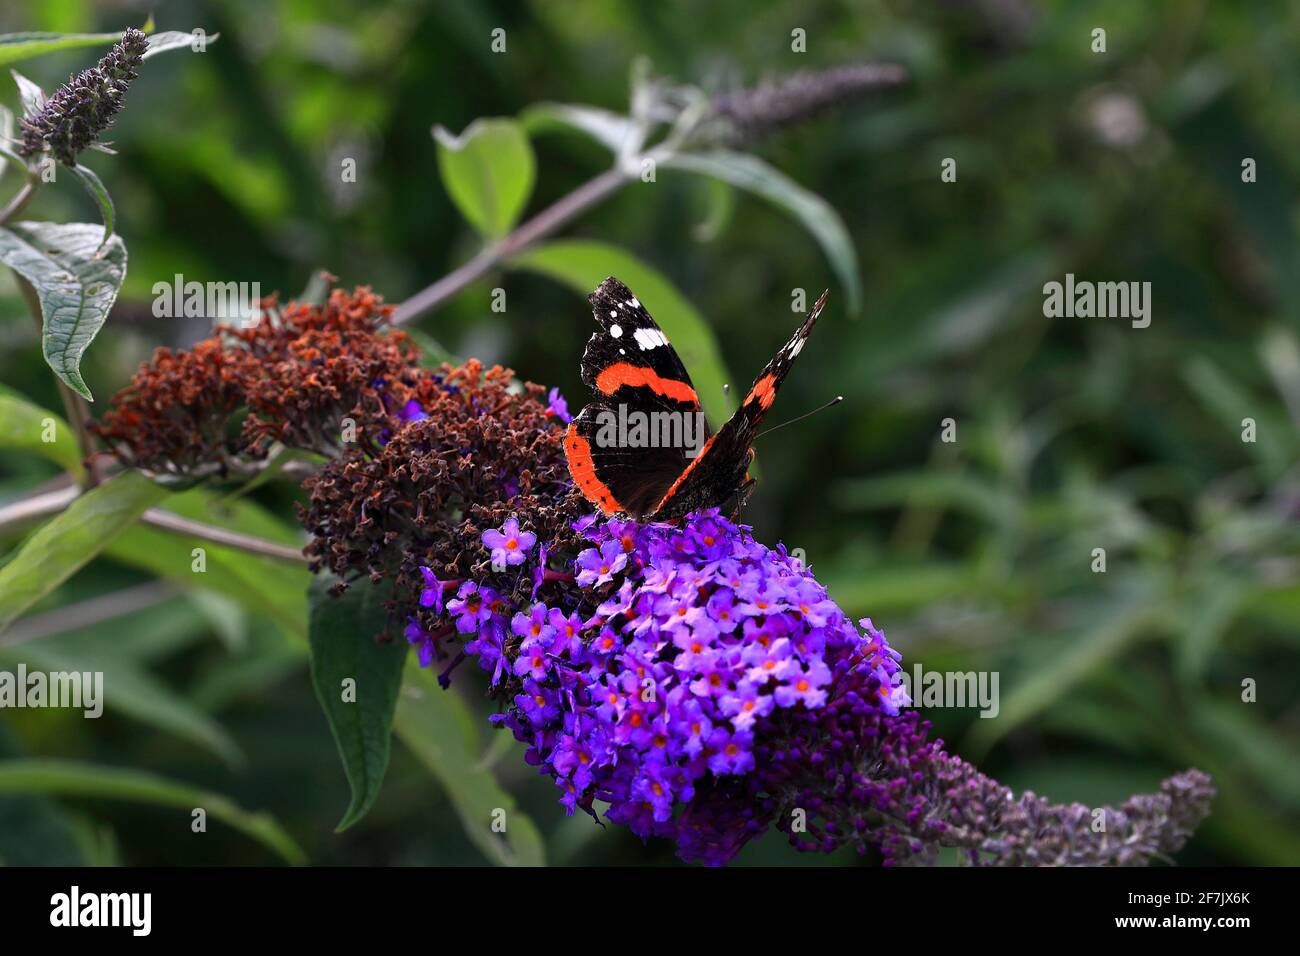 A colorful butterfly on a budleja that blooms in summer in a botanical garden Stock Photo